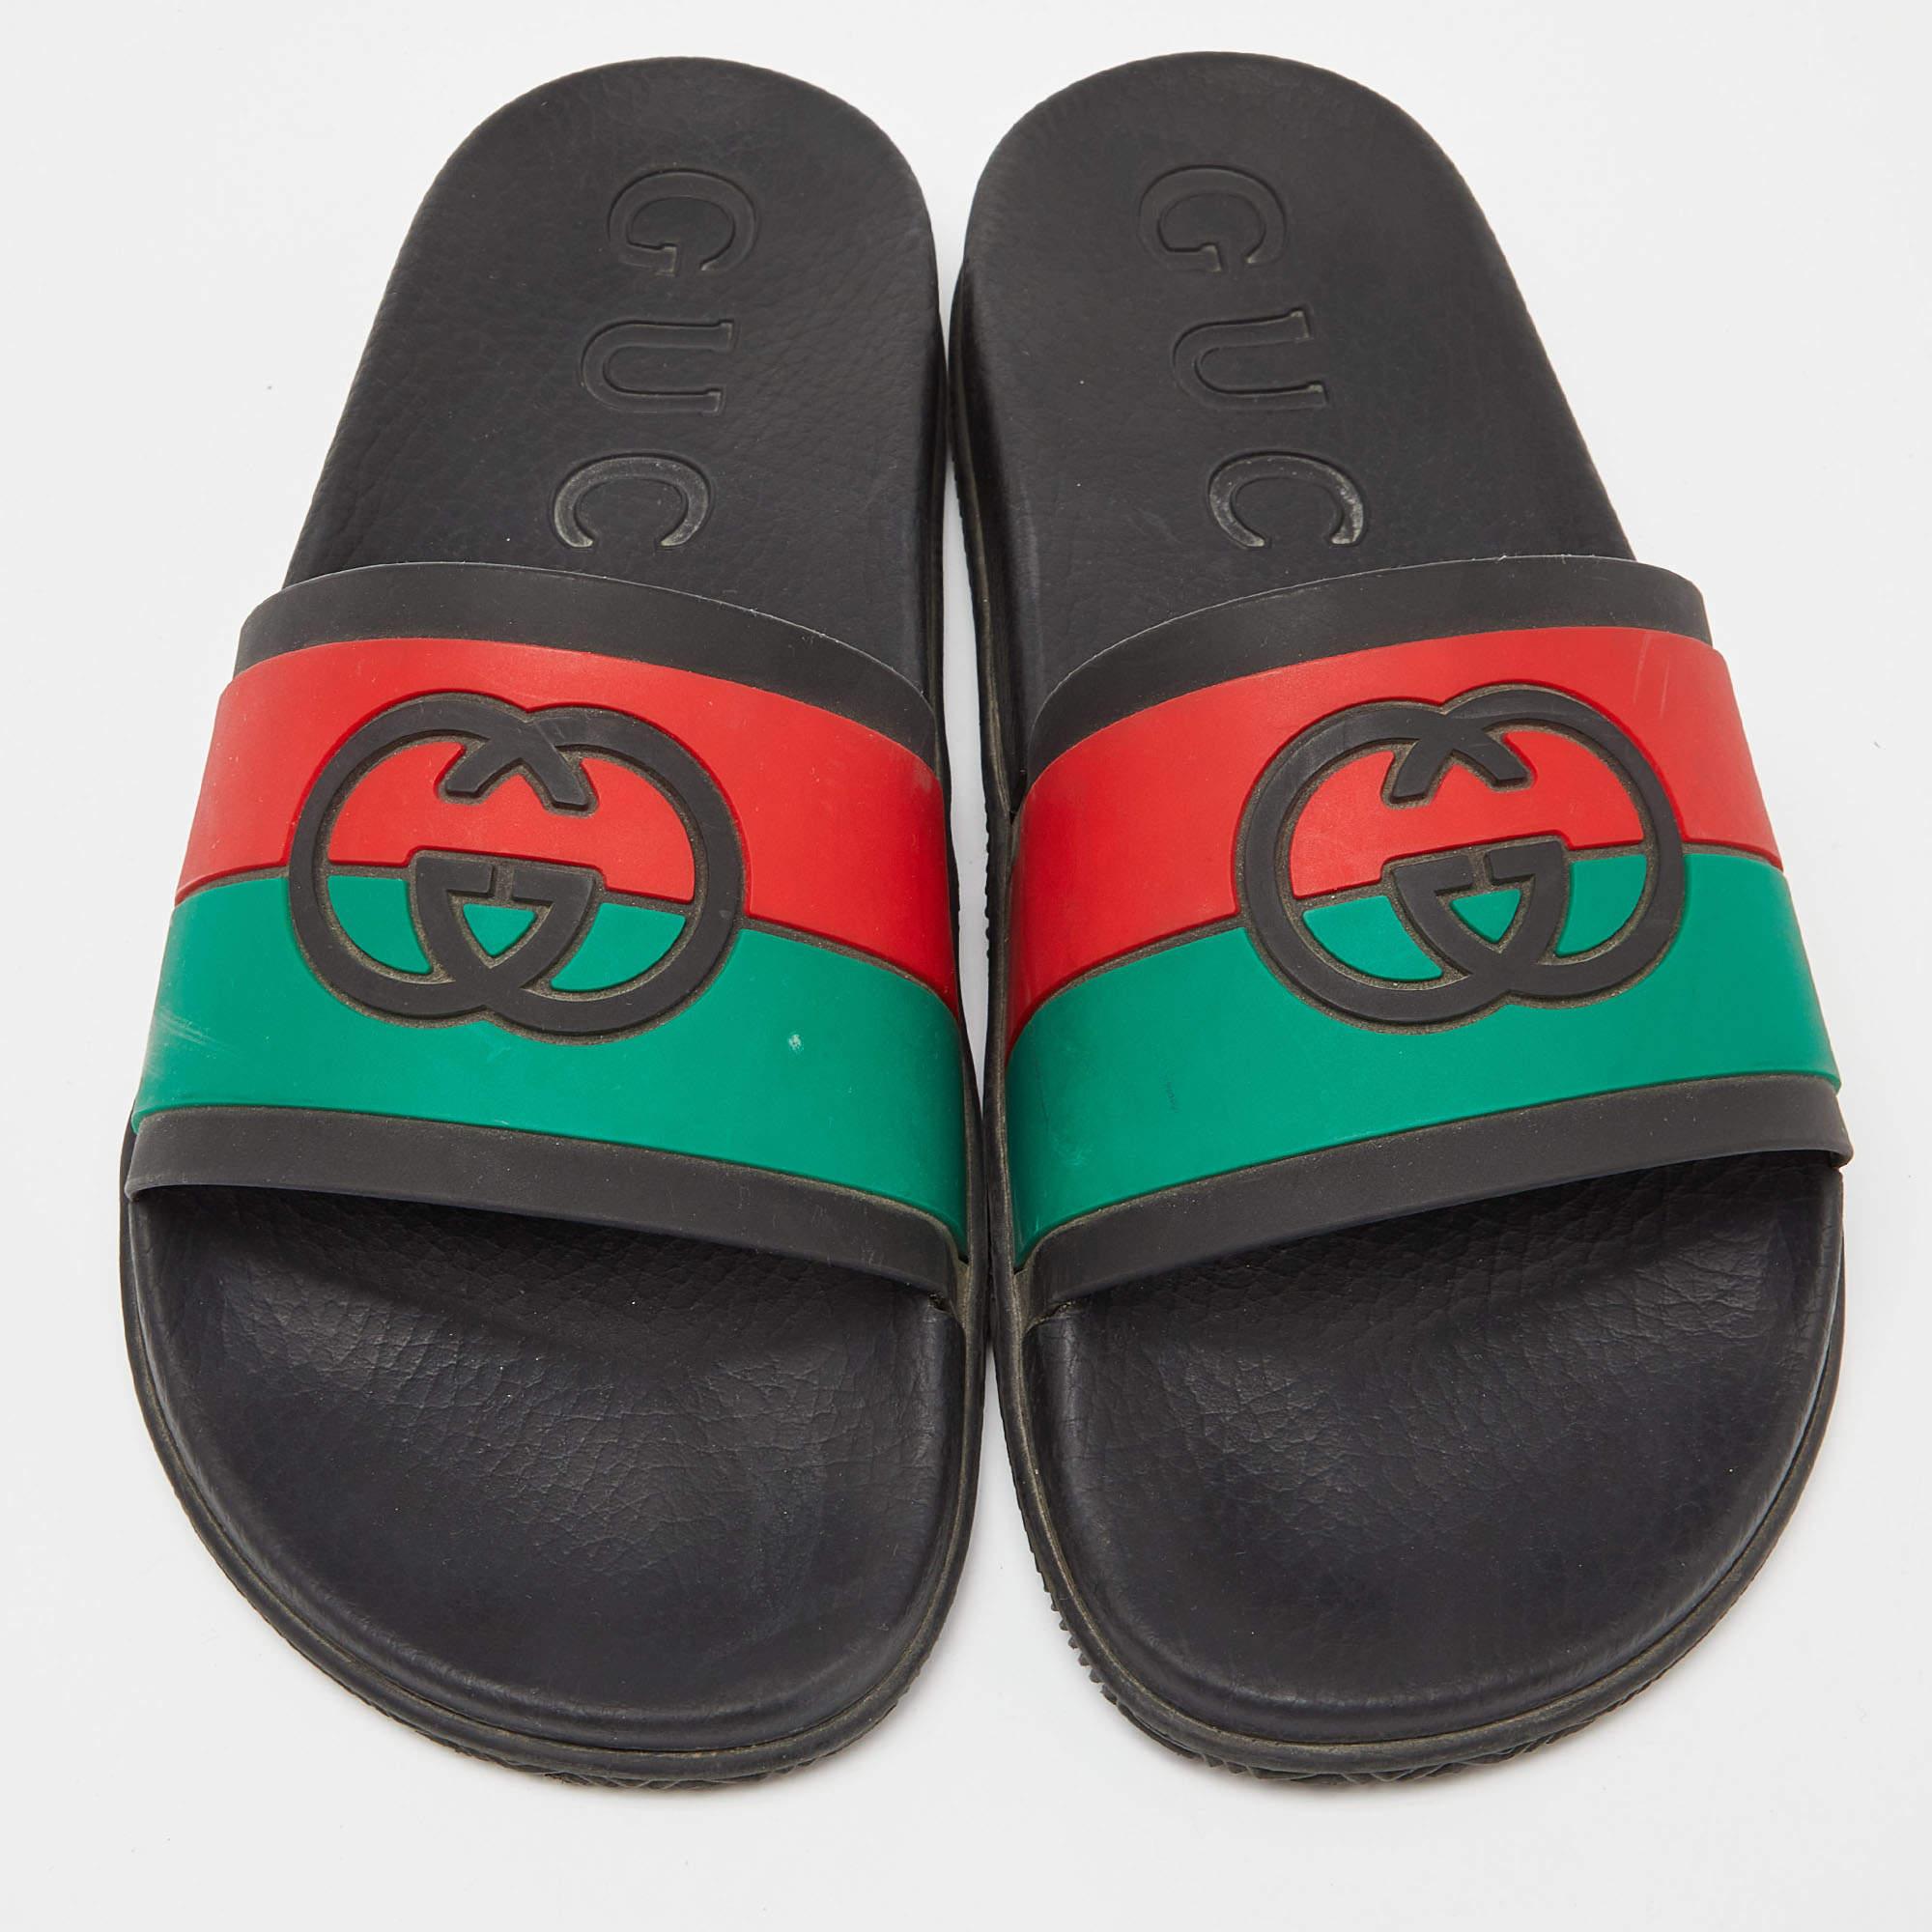 Gucci's rubber slides for men have the Web & GG branding on the uppers. They're perfect for the beach, vacation days, or everyday use.

